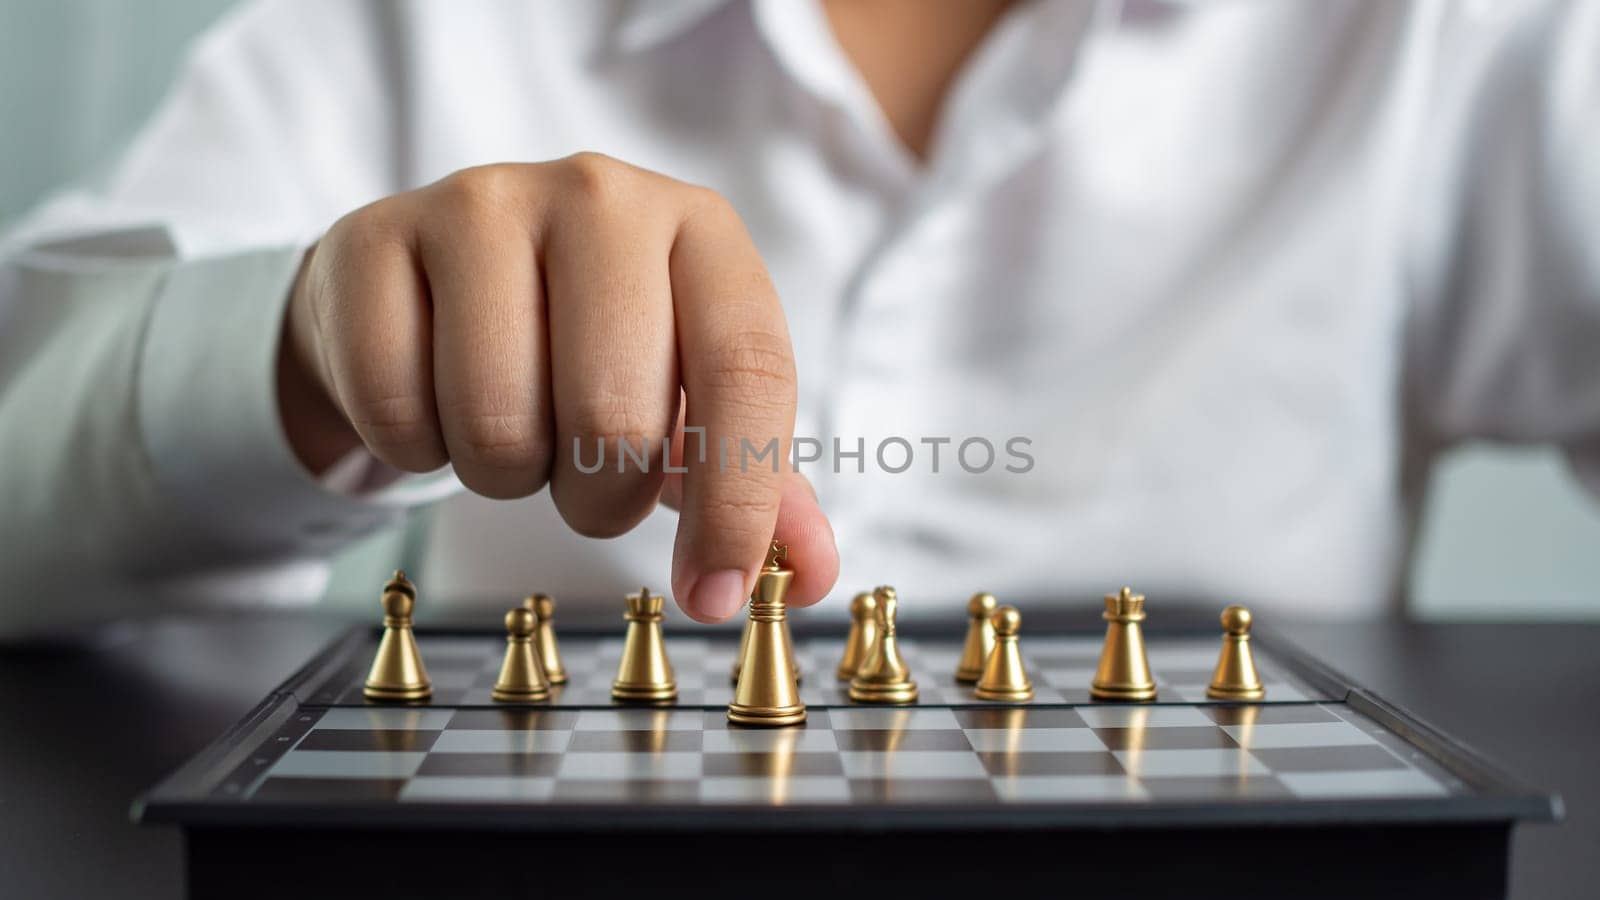 Businessman holding a king on a chess board to move forward and start the game represents Strategic planning and business planning